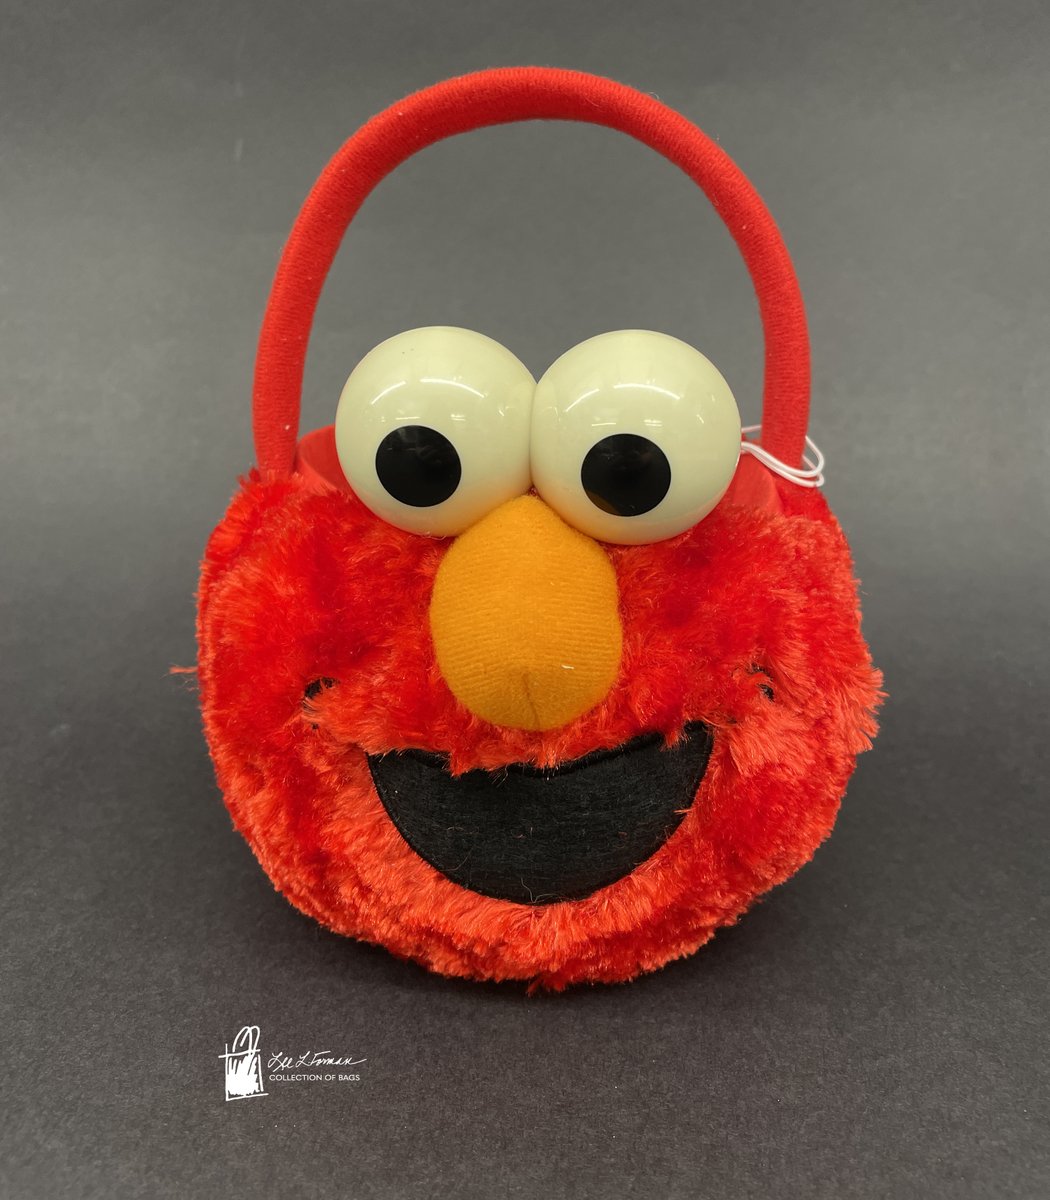 158/365: This bag features the familiar smile of Elmo. The Sesame Street character may identify as being 3.5 years old, but they were actually designed by Caroly Wilcox in 1979. 